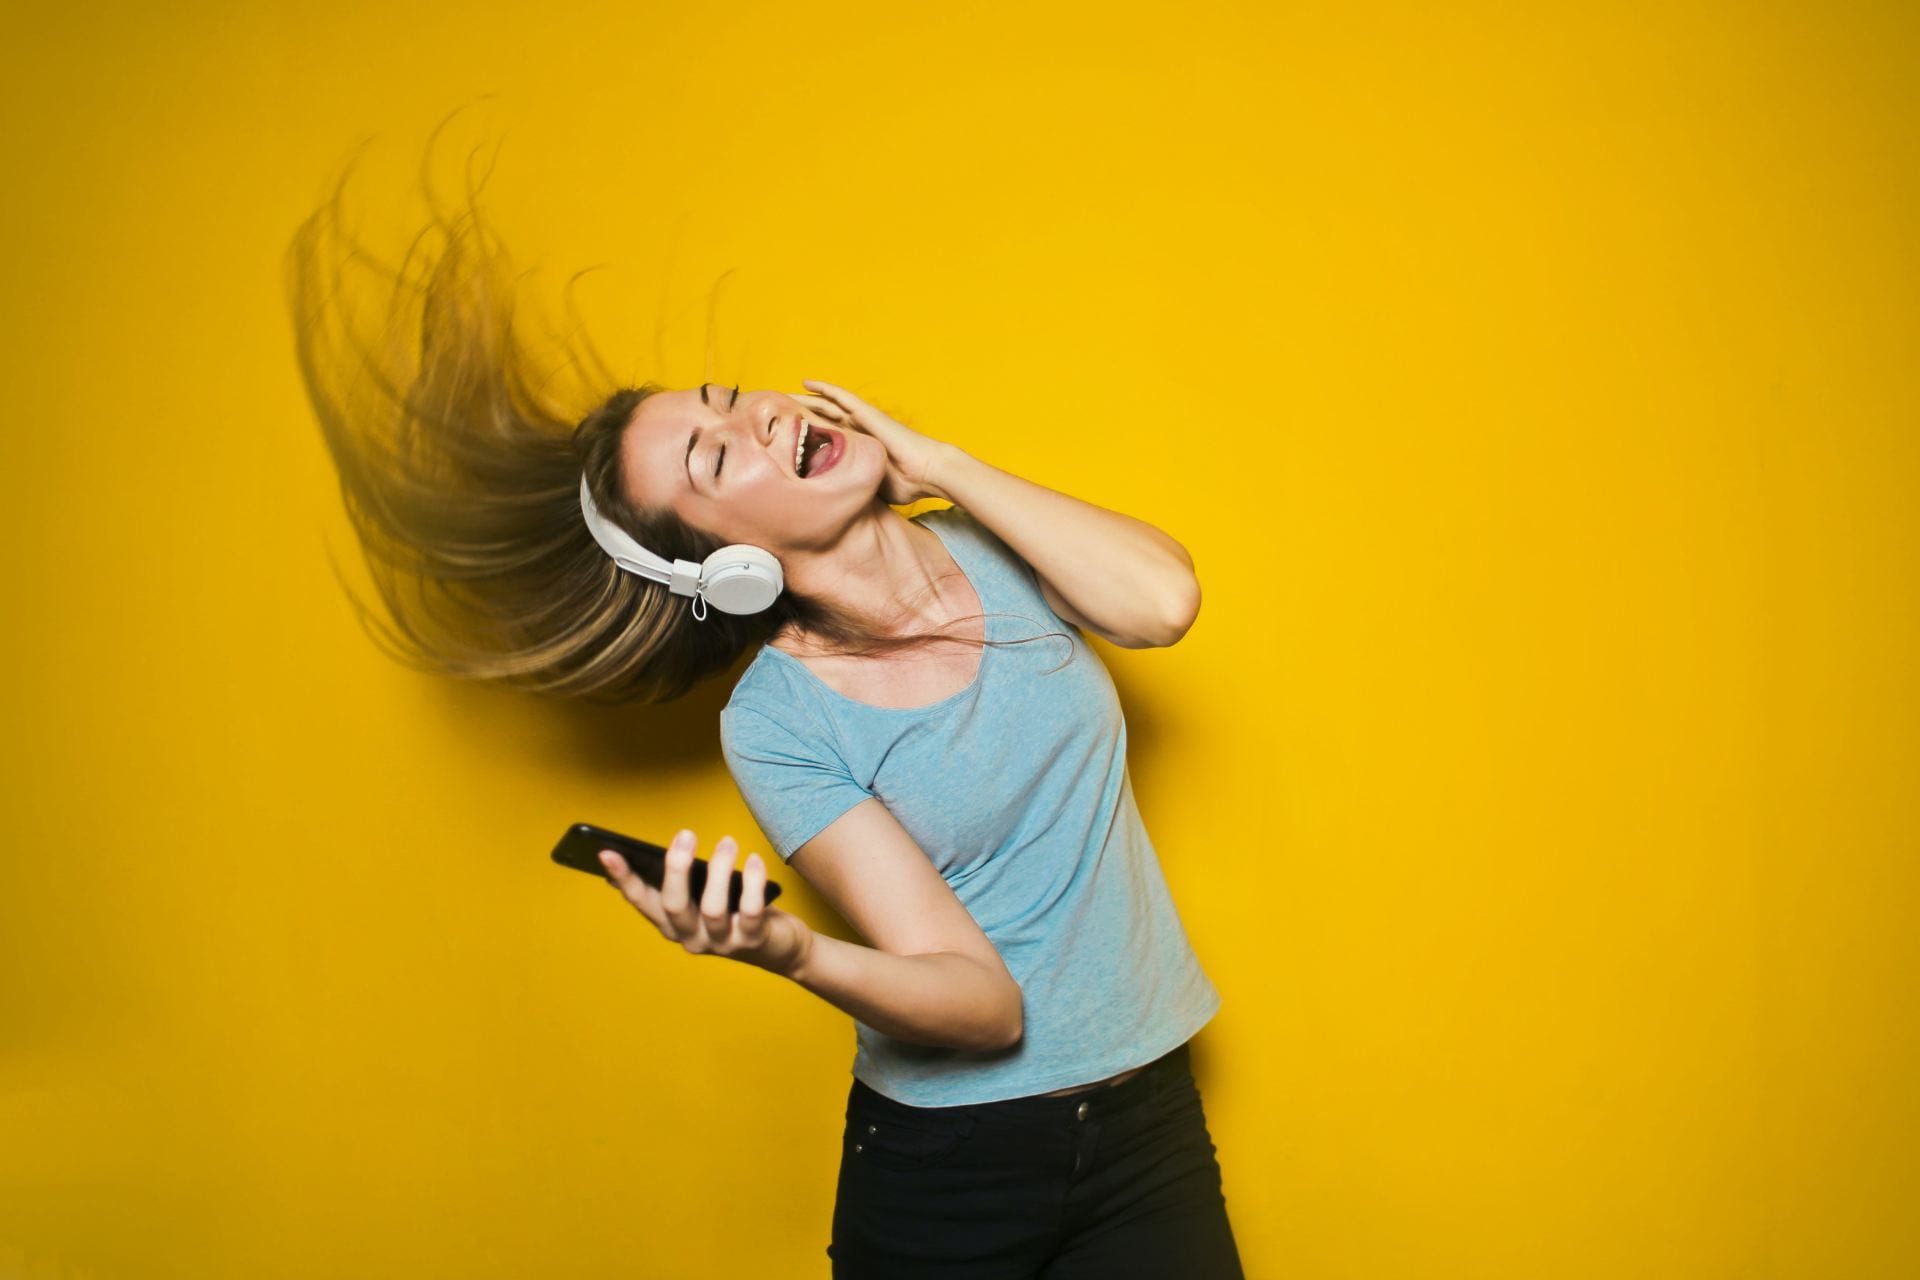 A happy looking woman with headphones on holding a phone on a yellow background.